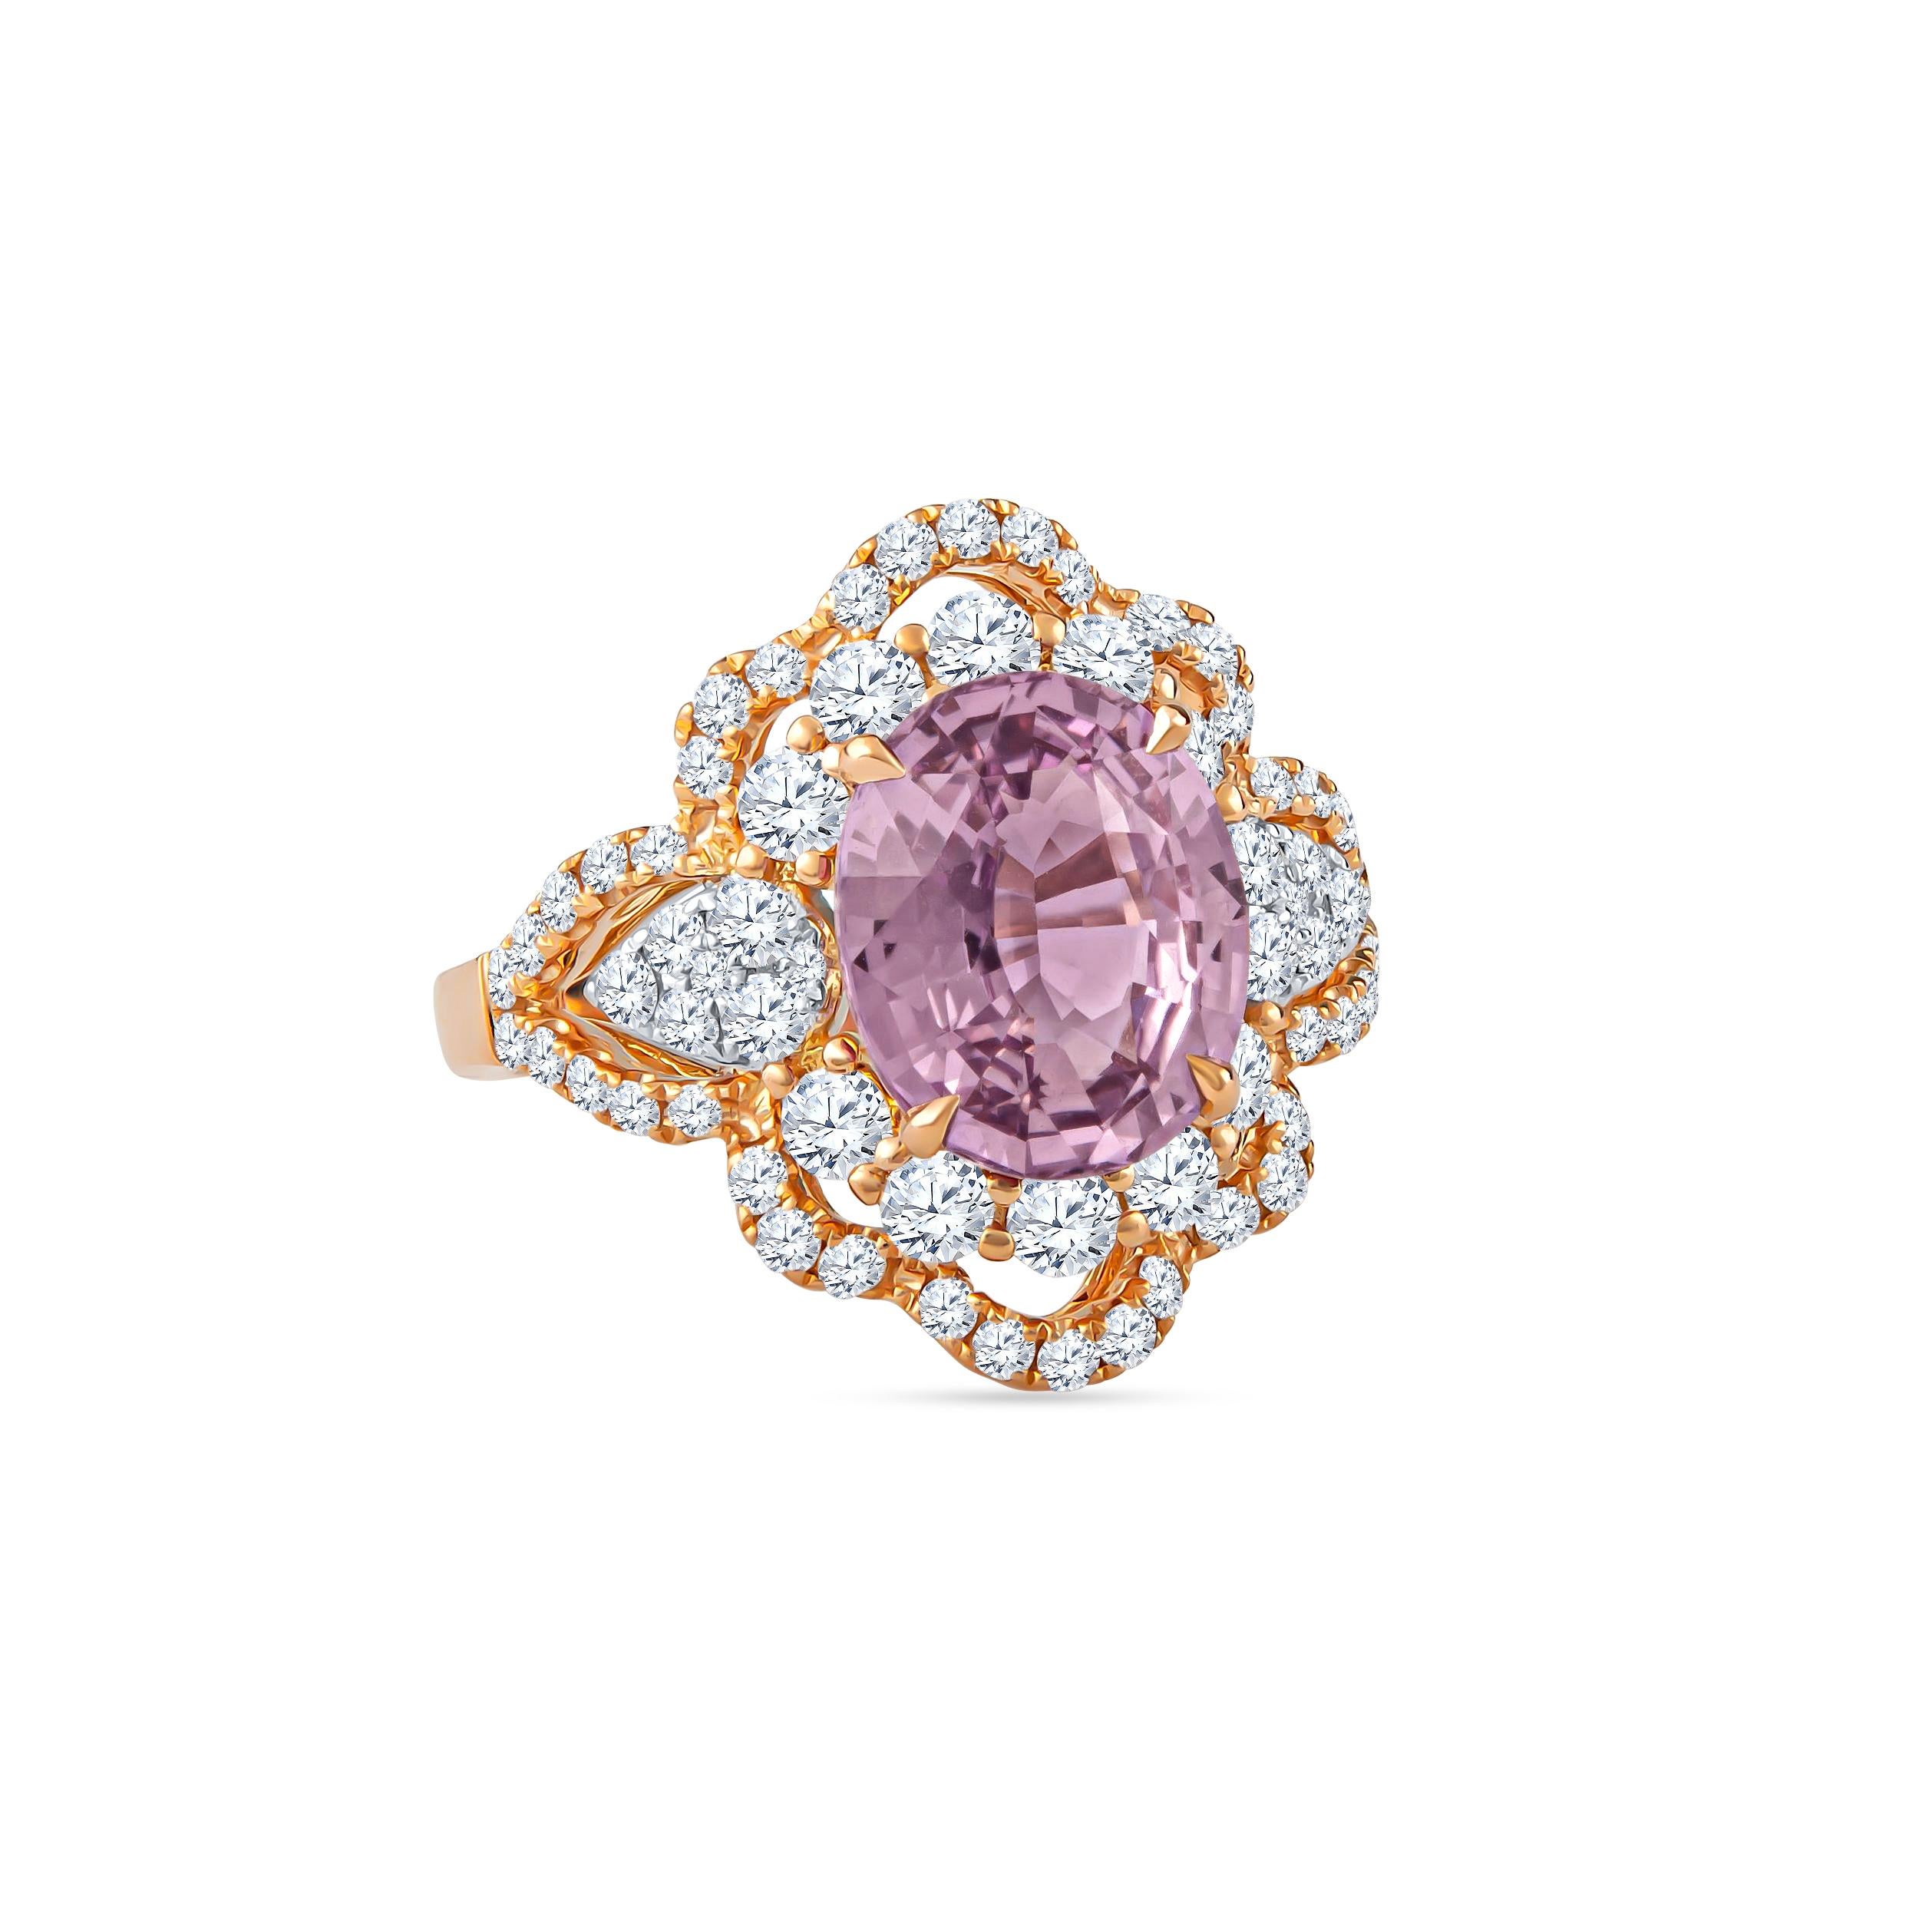 This stunning piece features a 4.75 carat purple-pink oval sapphire set in the center of an 18K rose gold ring that is accompanied by a GIA laboratory report. The sapphire is surrounded by 1.39 carats of round brilliant cut diamonds (Clarity: